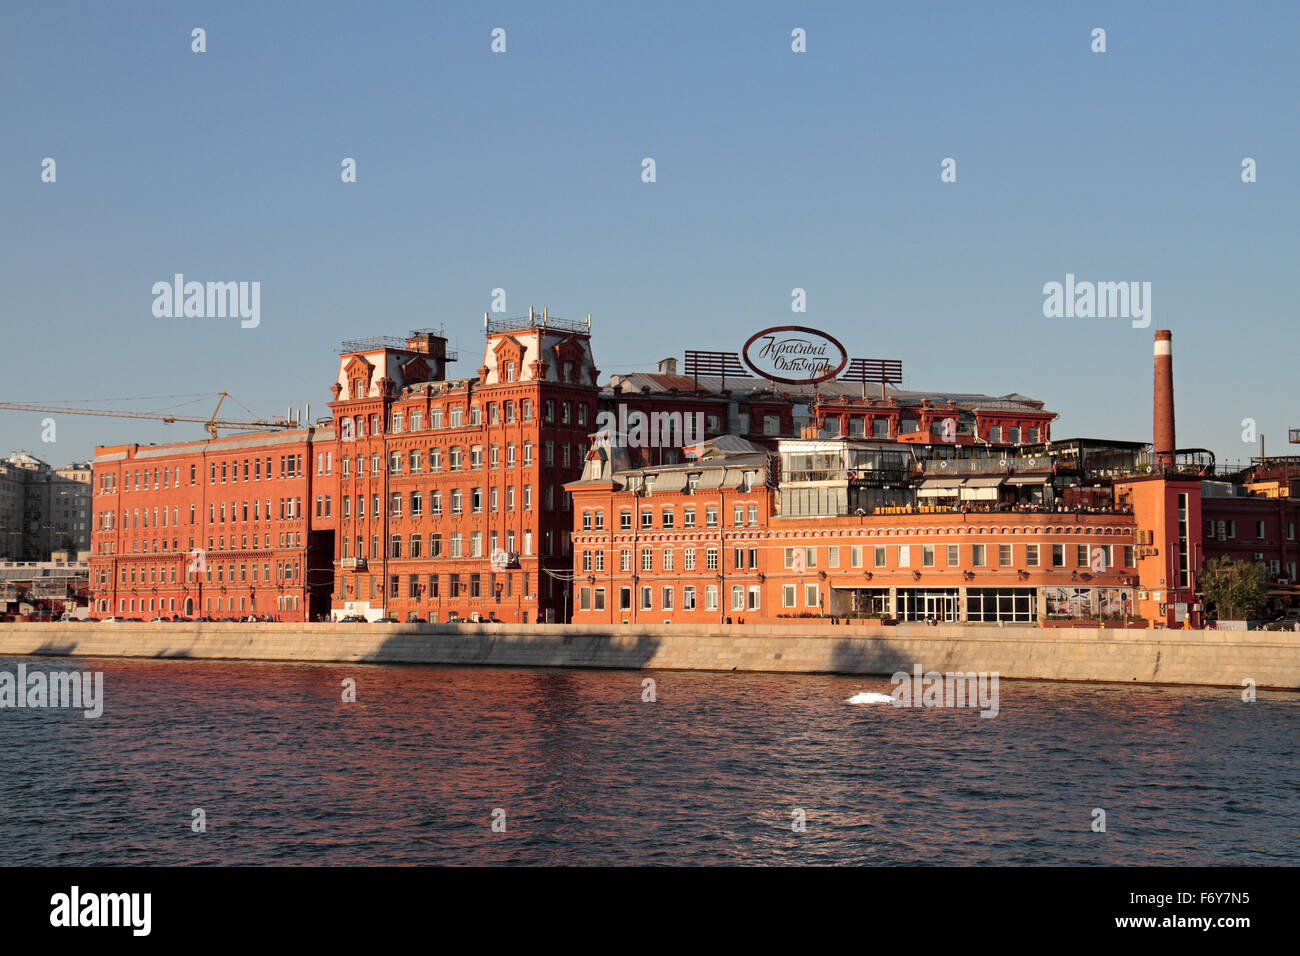 The Red October Chocolate factory and Strelka Institute on the Moskva River, Moscow, Russia. Stock Photo